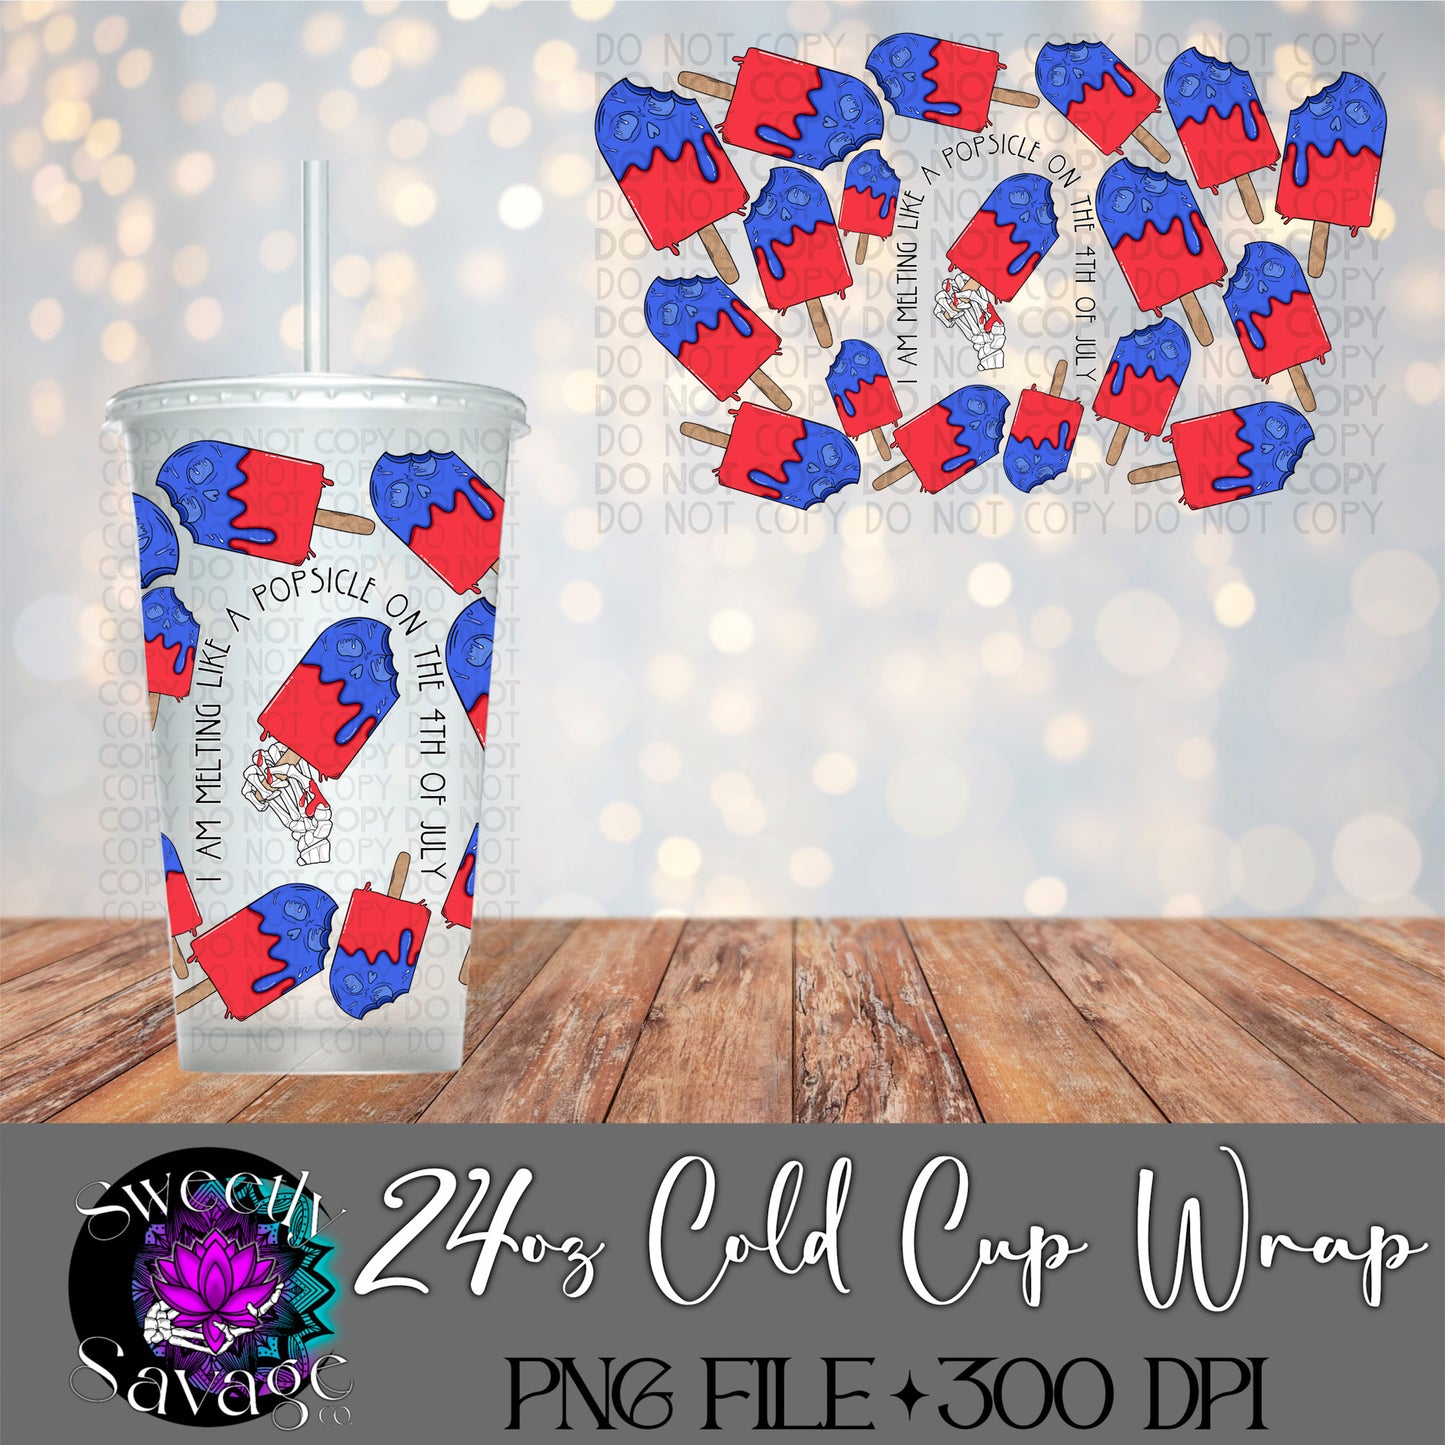 Melting like a popsicle on the 4th of July 24oz Cold Cup wrap